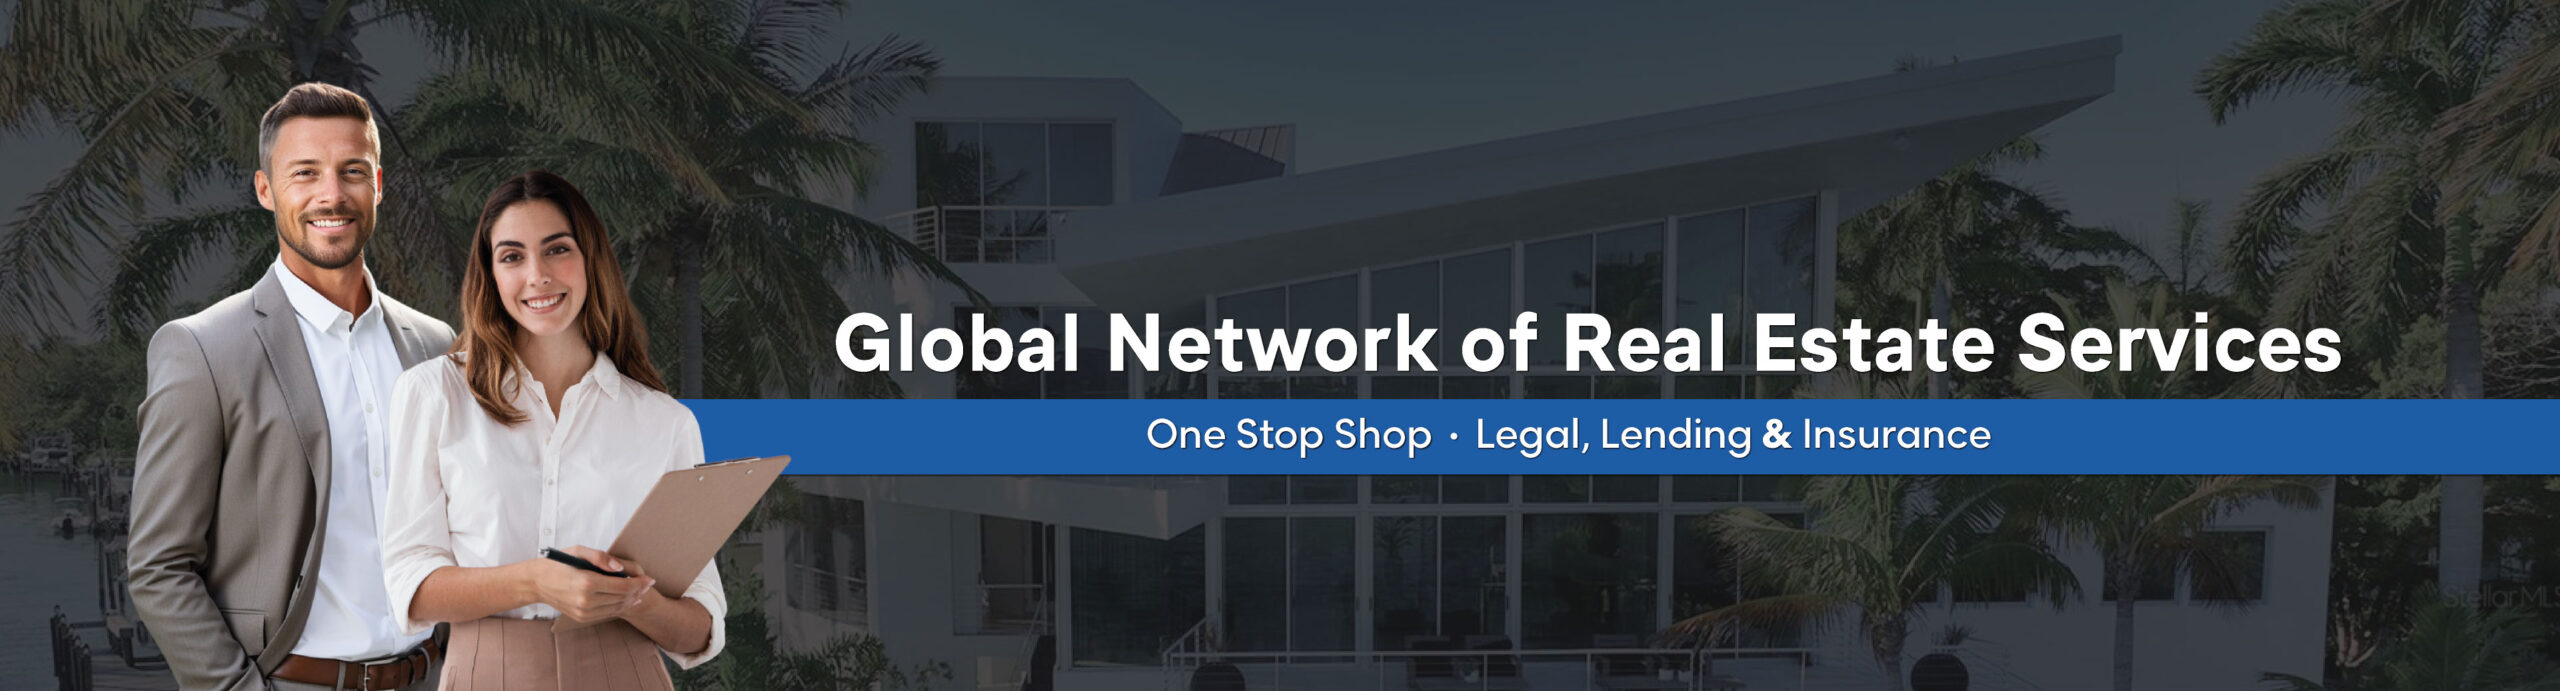 Global Network of Real Estate Services, One Stop Shop, Legal, lending and insurance.